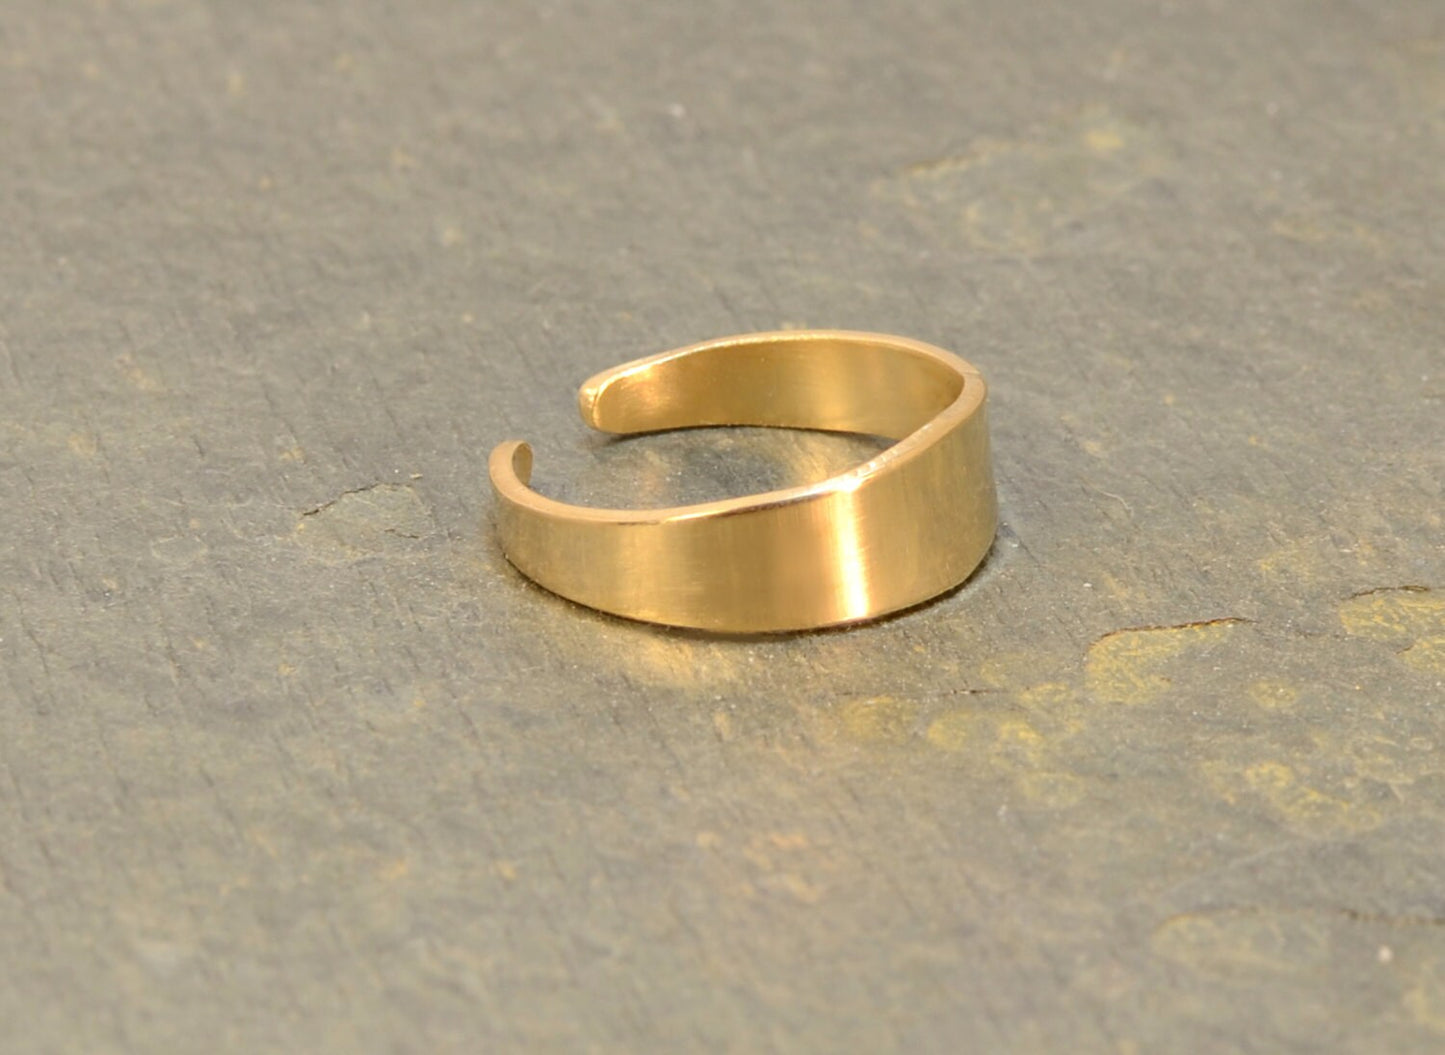 Solid 14k Yellow Gold Toe Ring Handcrafted with Tapered Design